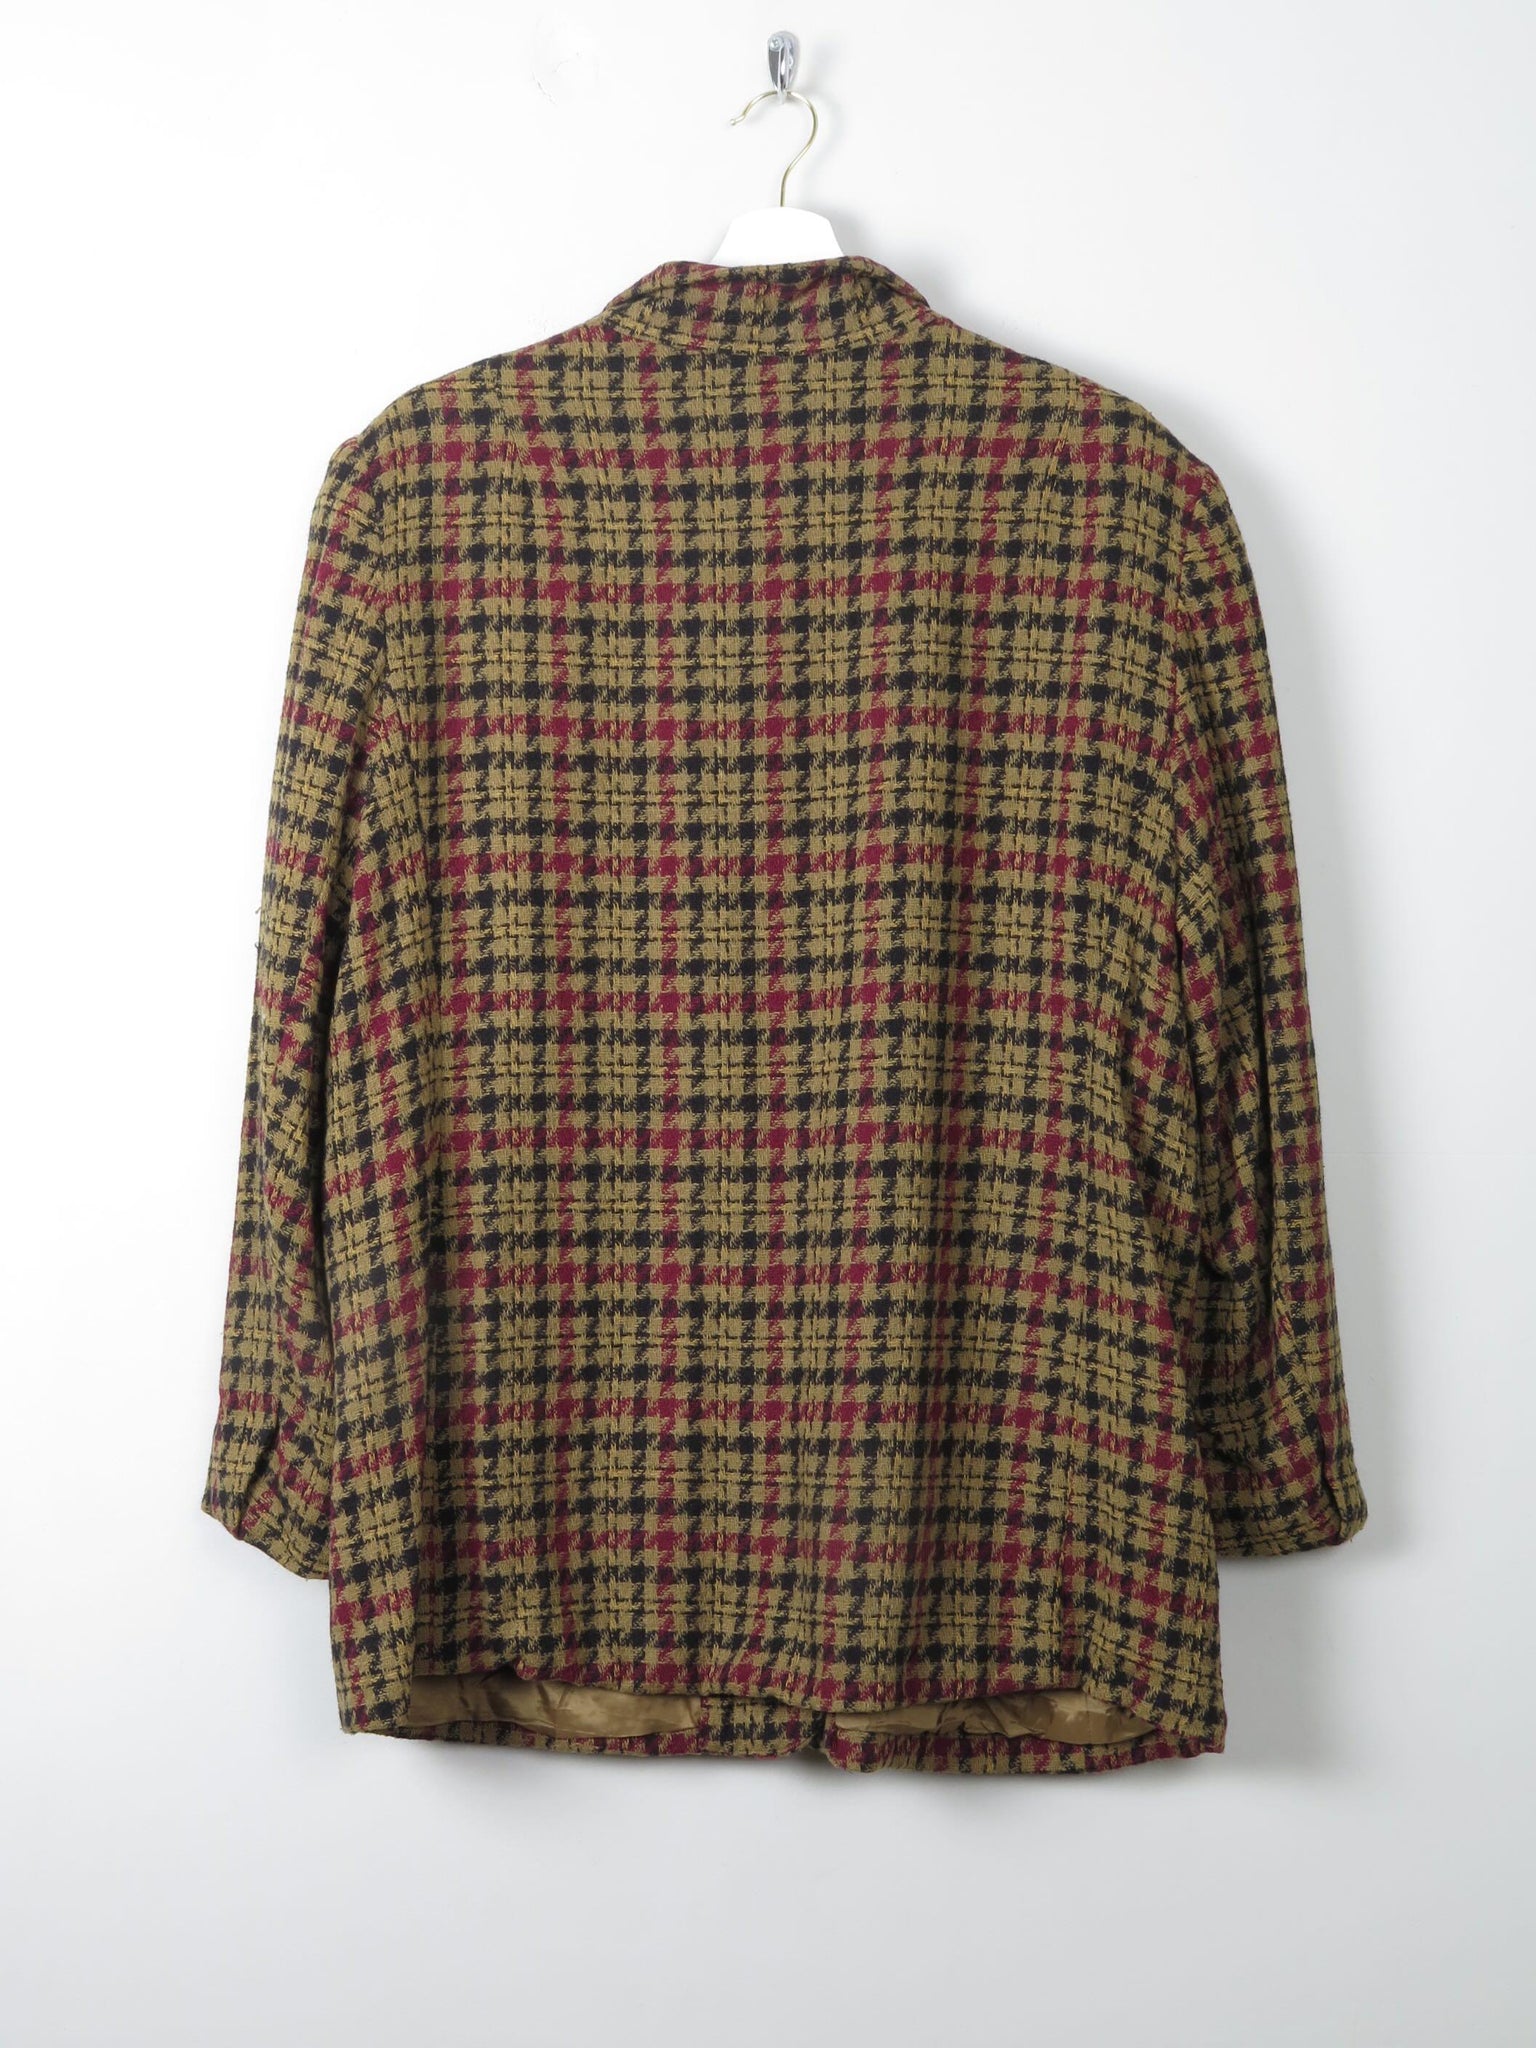 Women's Green Check Jacket L/XL - The Harlequin